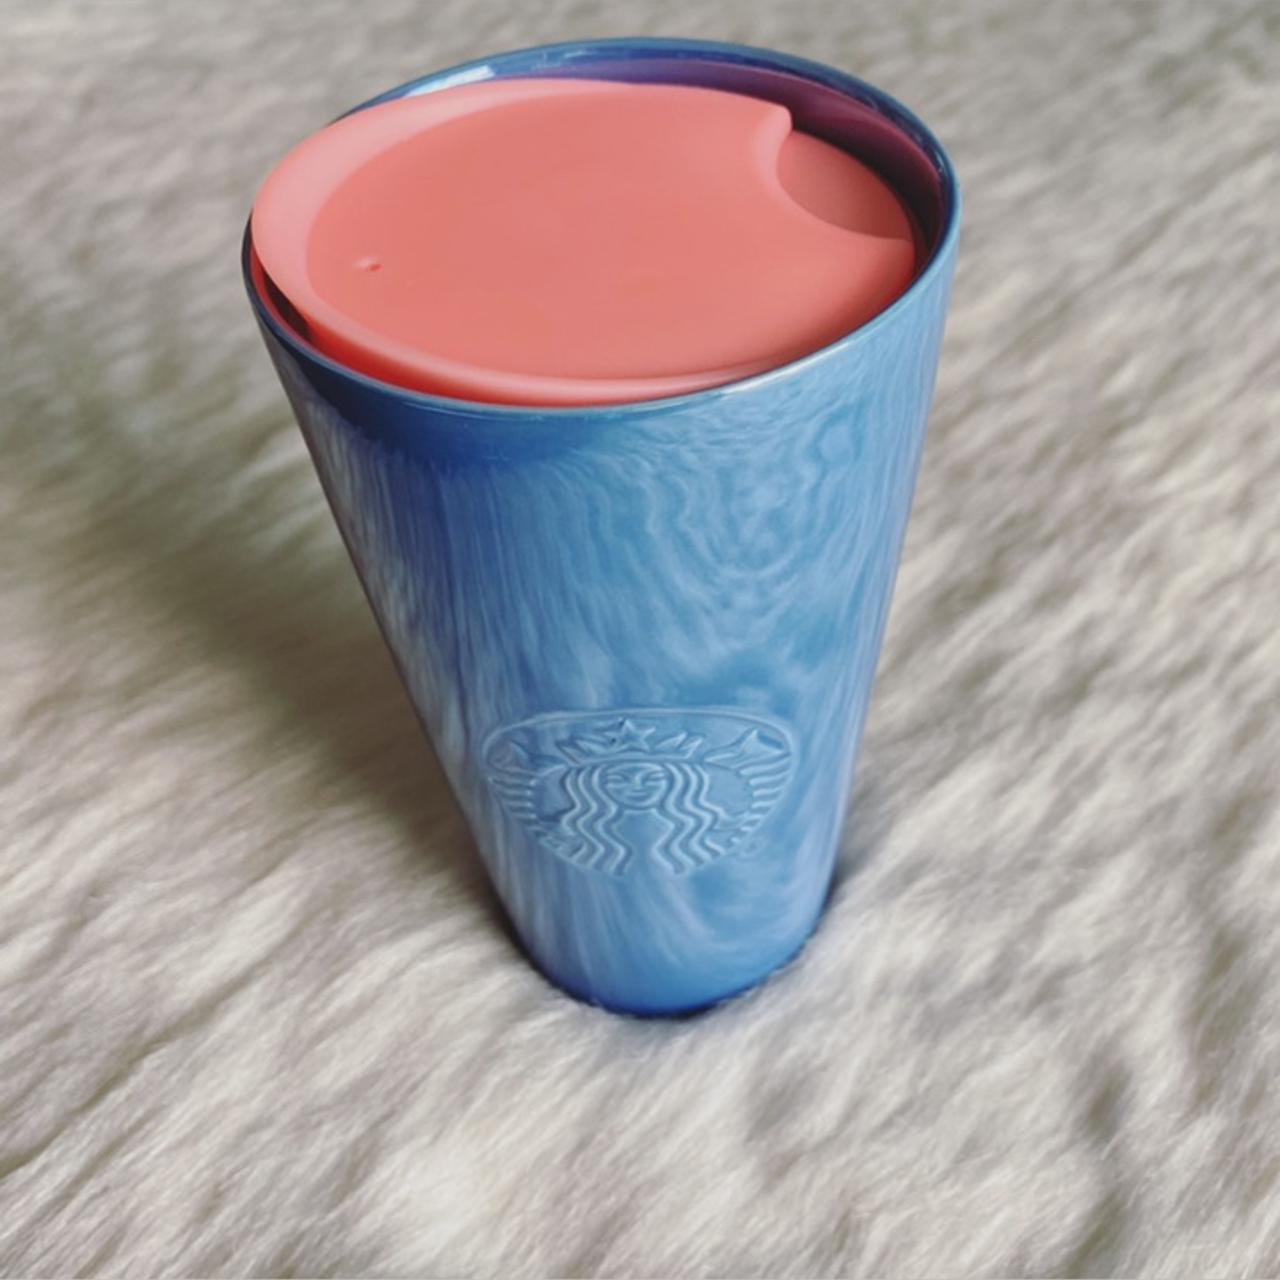 Starbucks Recycled Glass Cold-to-go Cup 16 FL - Depop